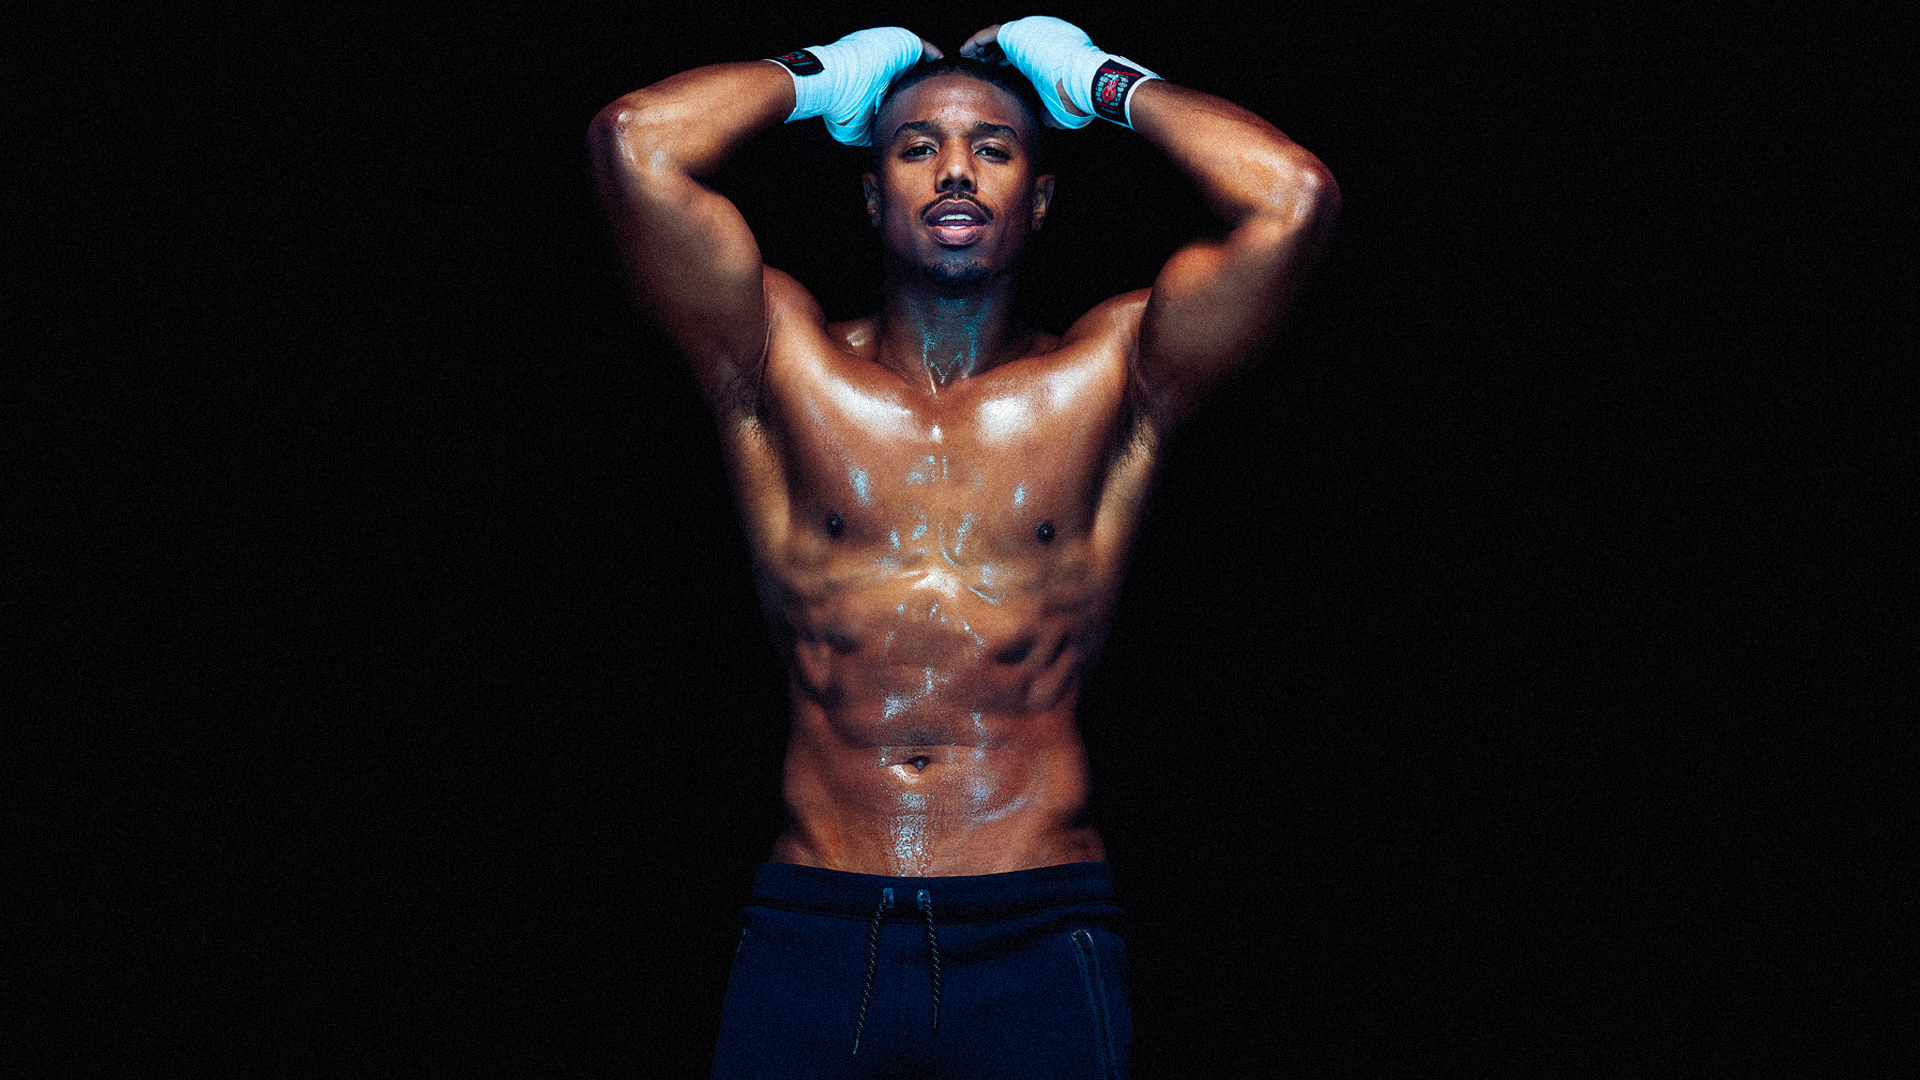 Get A Body Like Adonis With Michael B. Jordan’s Creed Workout Plan.